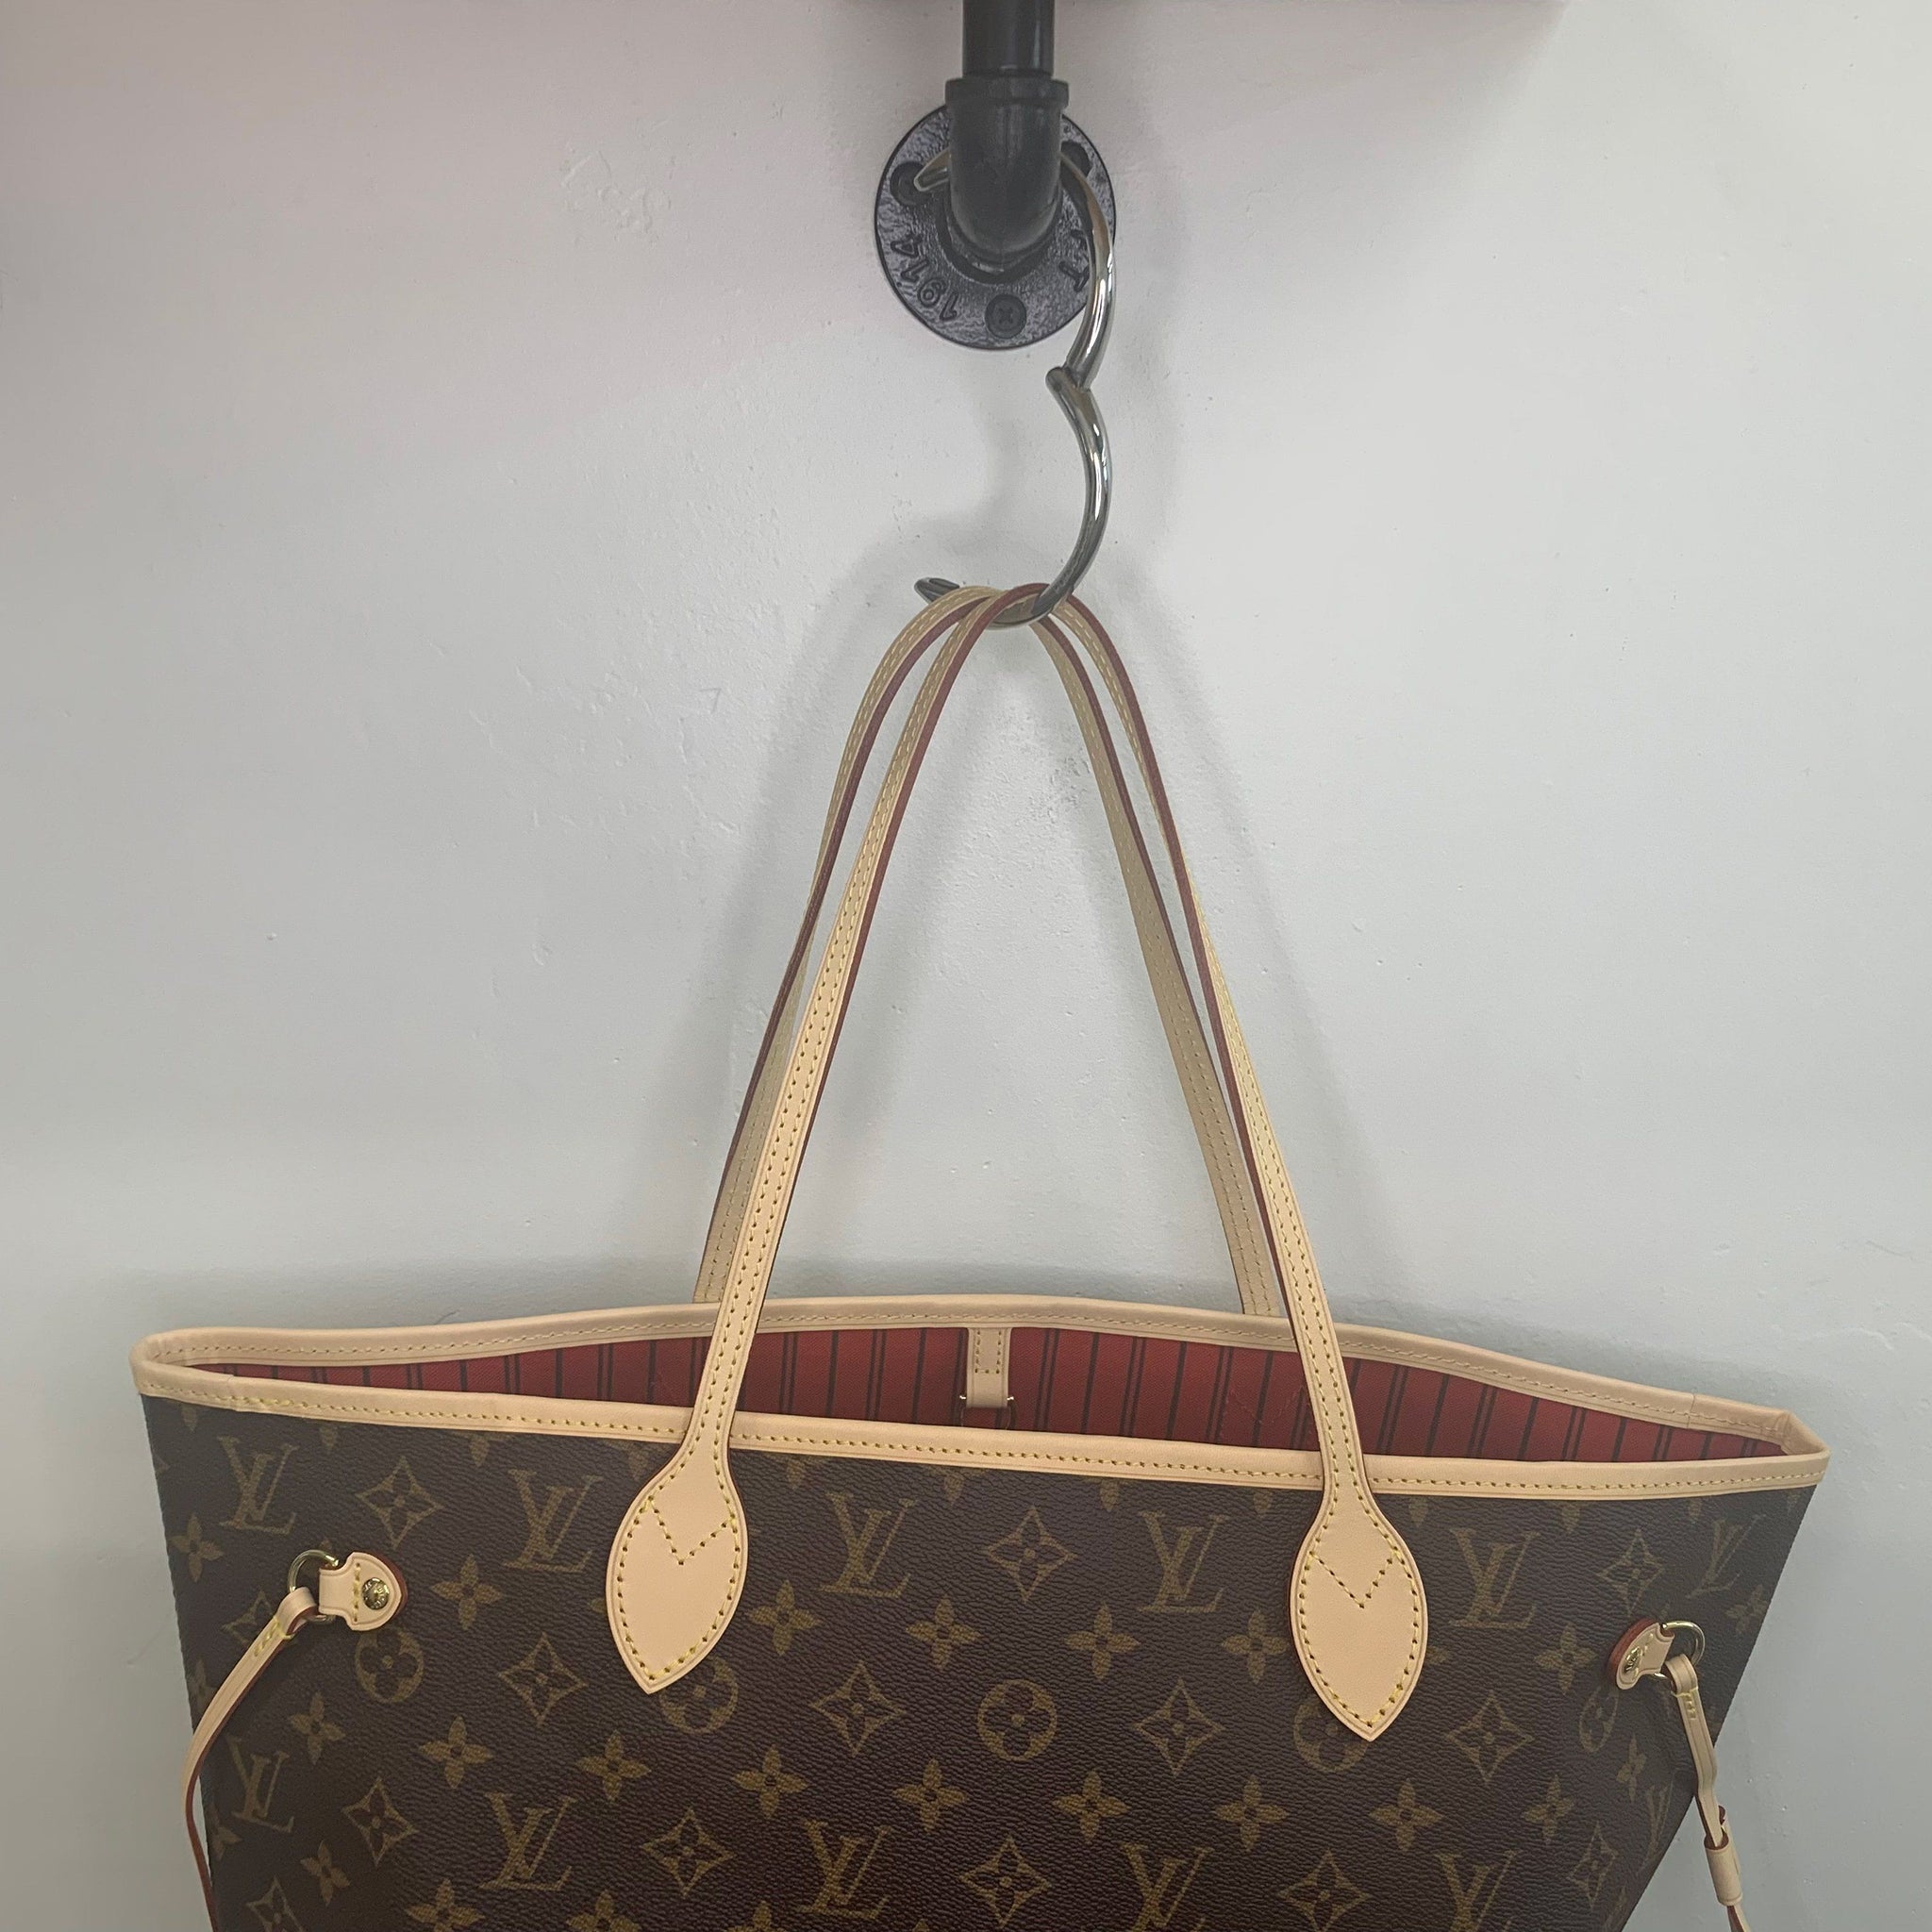 In Depth! Louis Vuitton Trevi PM Review  Whats I carry & Comparing to  Speedy + Neverfull 